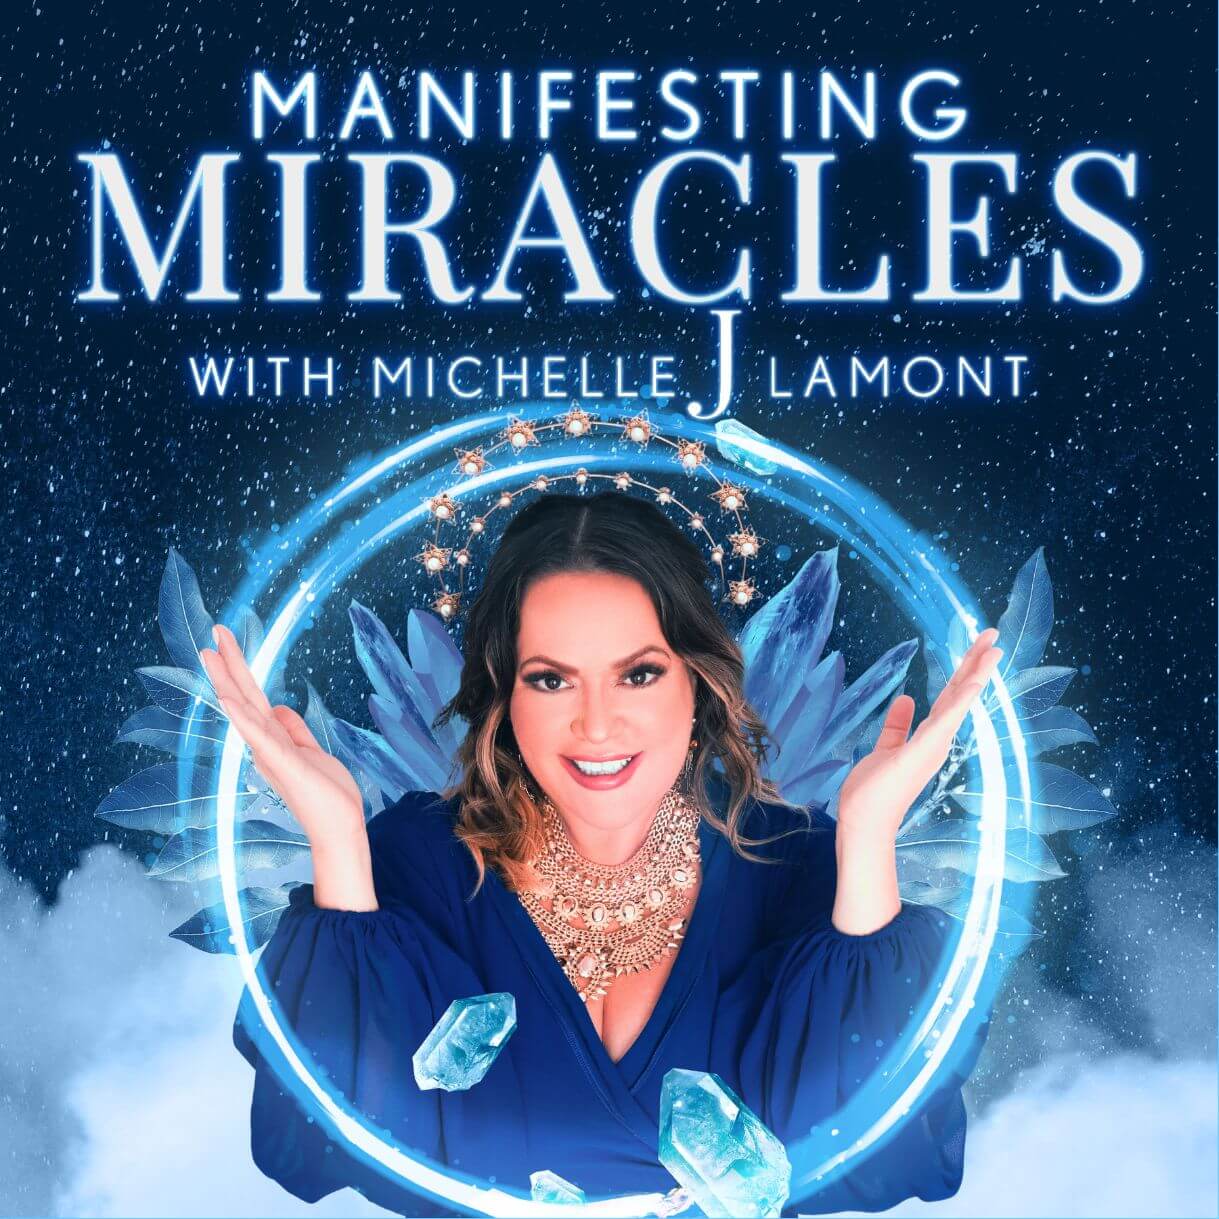 Manifesting Miracles podcast michellejlamont.com